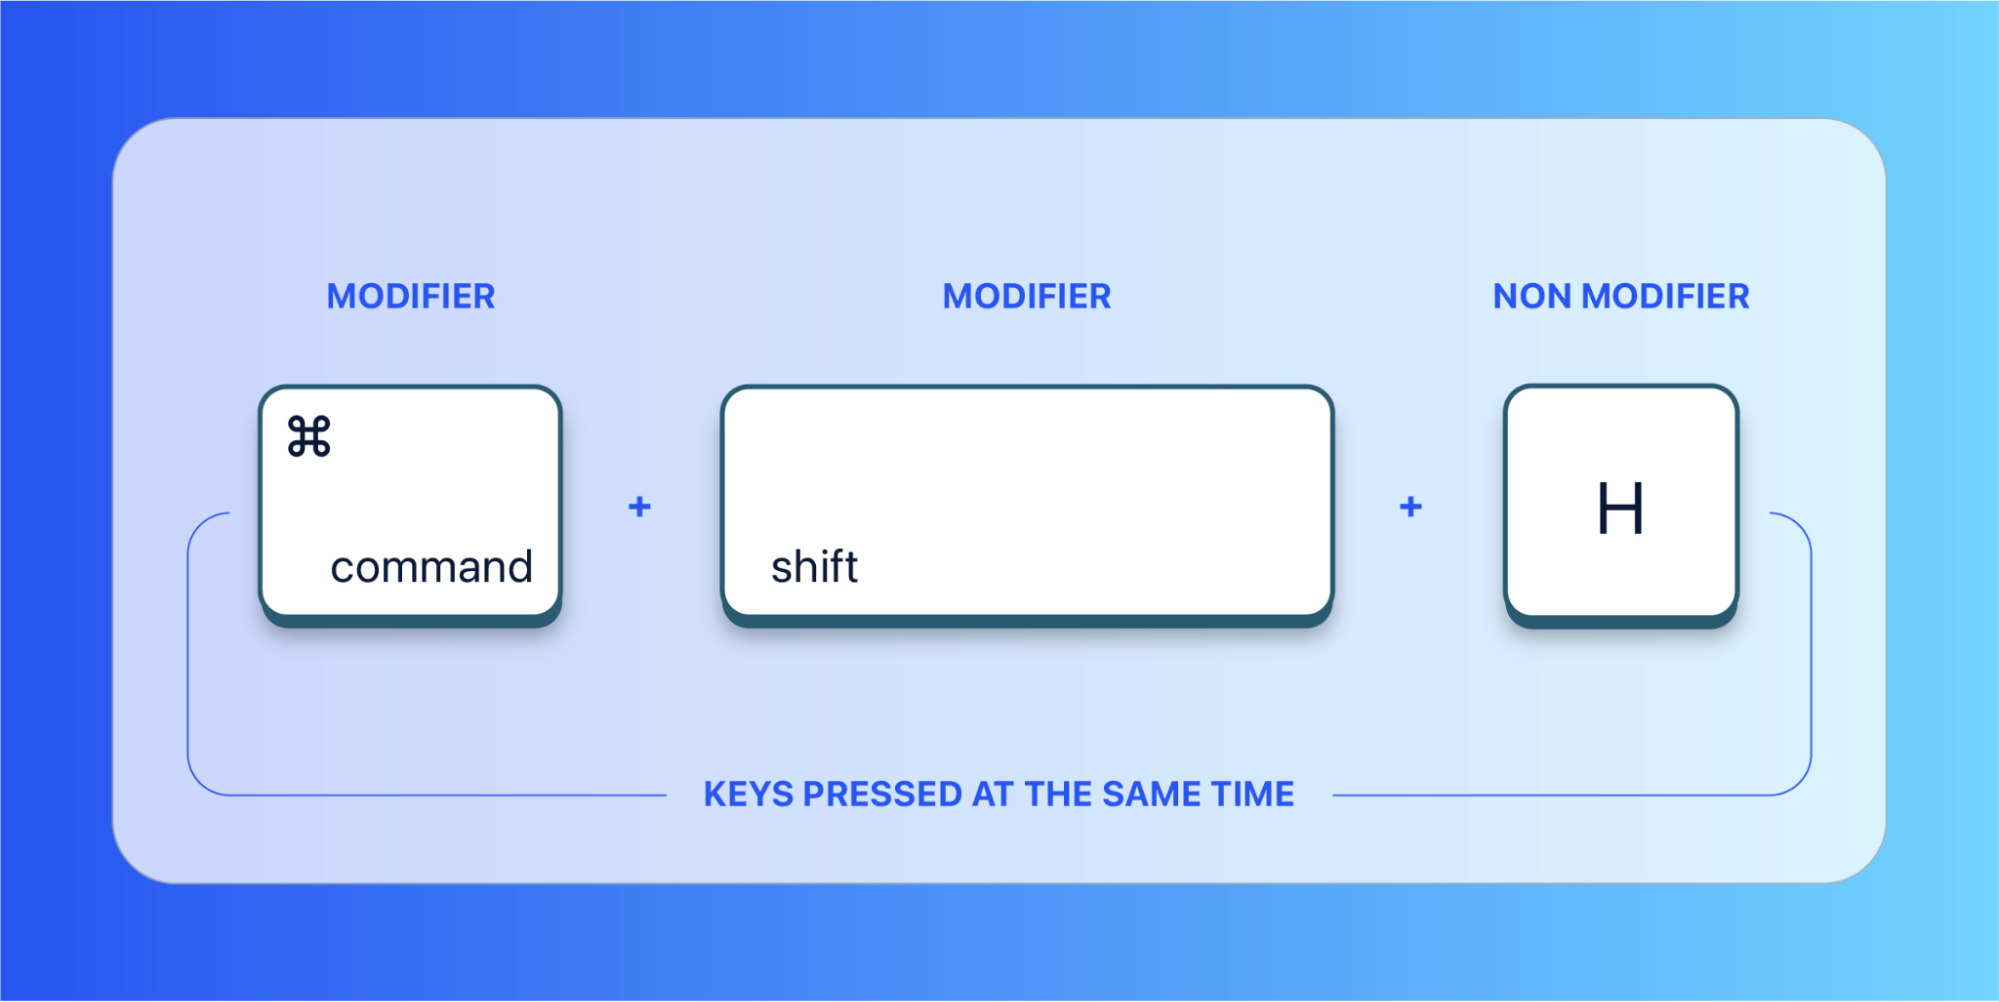 Example composition of a keyboard shortcut: modifiers and non-modifiers. The example here shows the "command" key (modifier), the "shift" key (modifier), and the "H" key (non-modifier) being used at the same time.